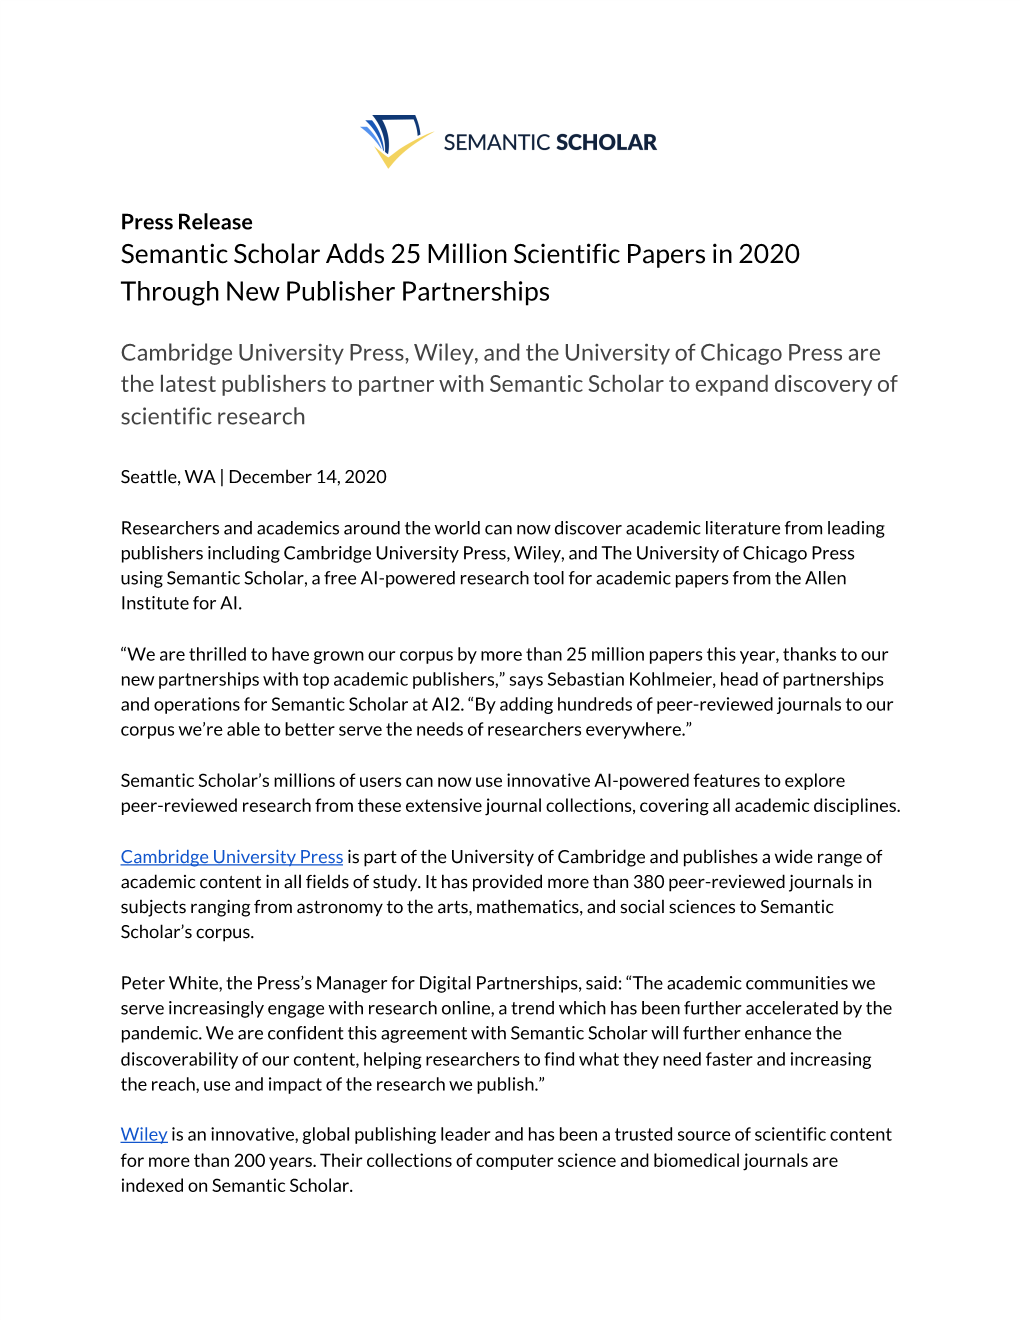 Semantic Scholar Adds 25 Million Scientific Papers in 2020 Through New Publisher Partnerships